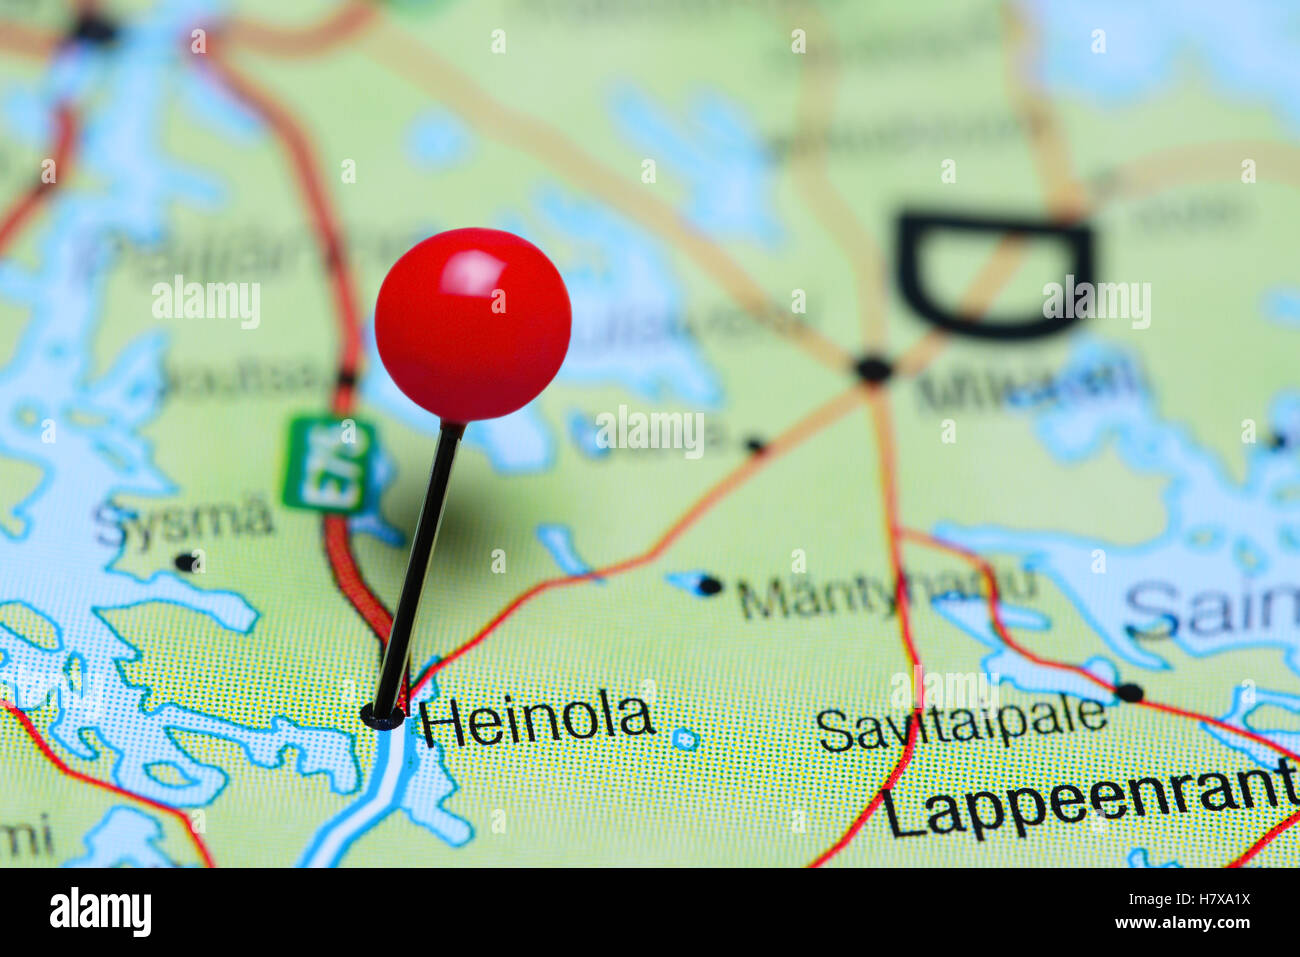 Heinola pinned on a map of Finland Stock Photo